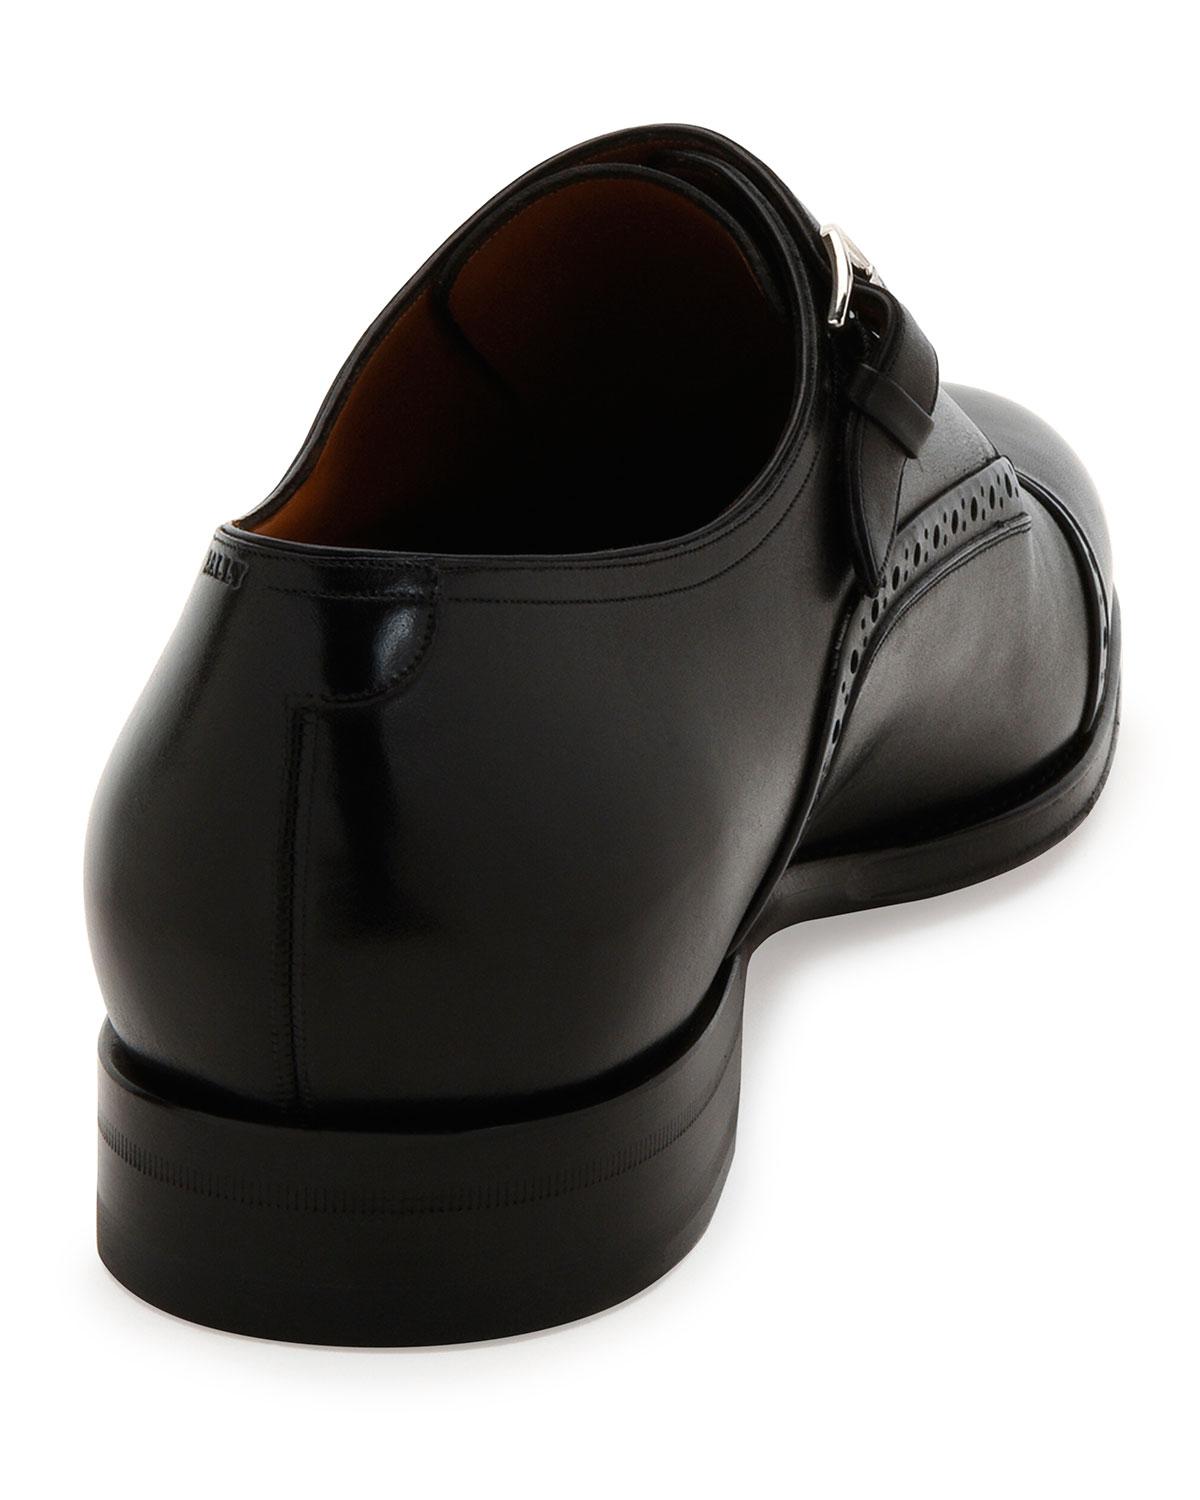 black dress shoes with strap